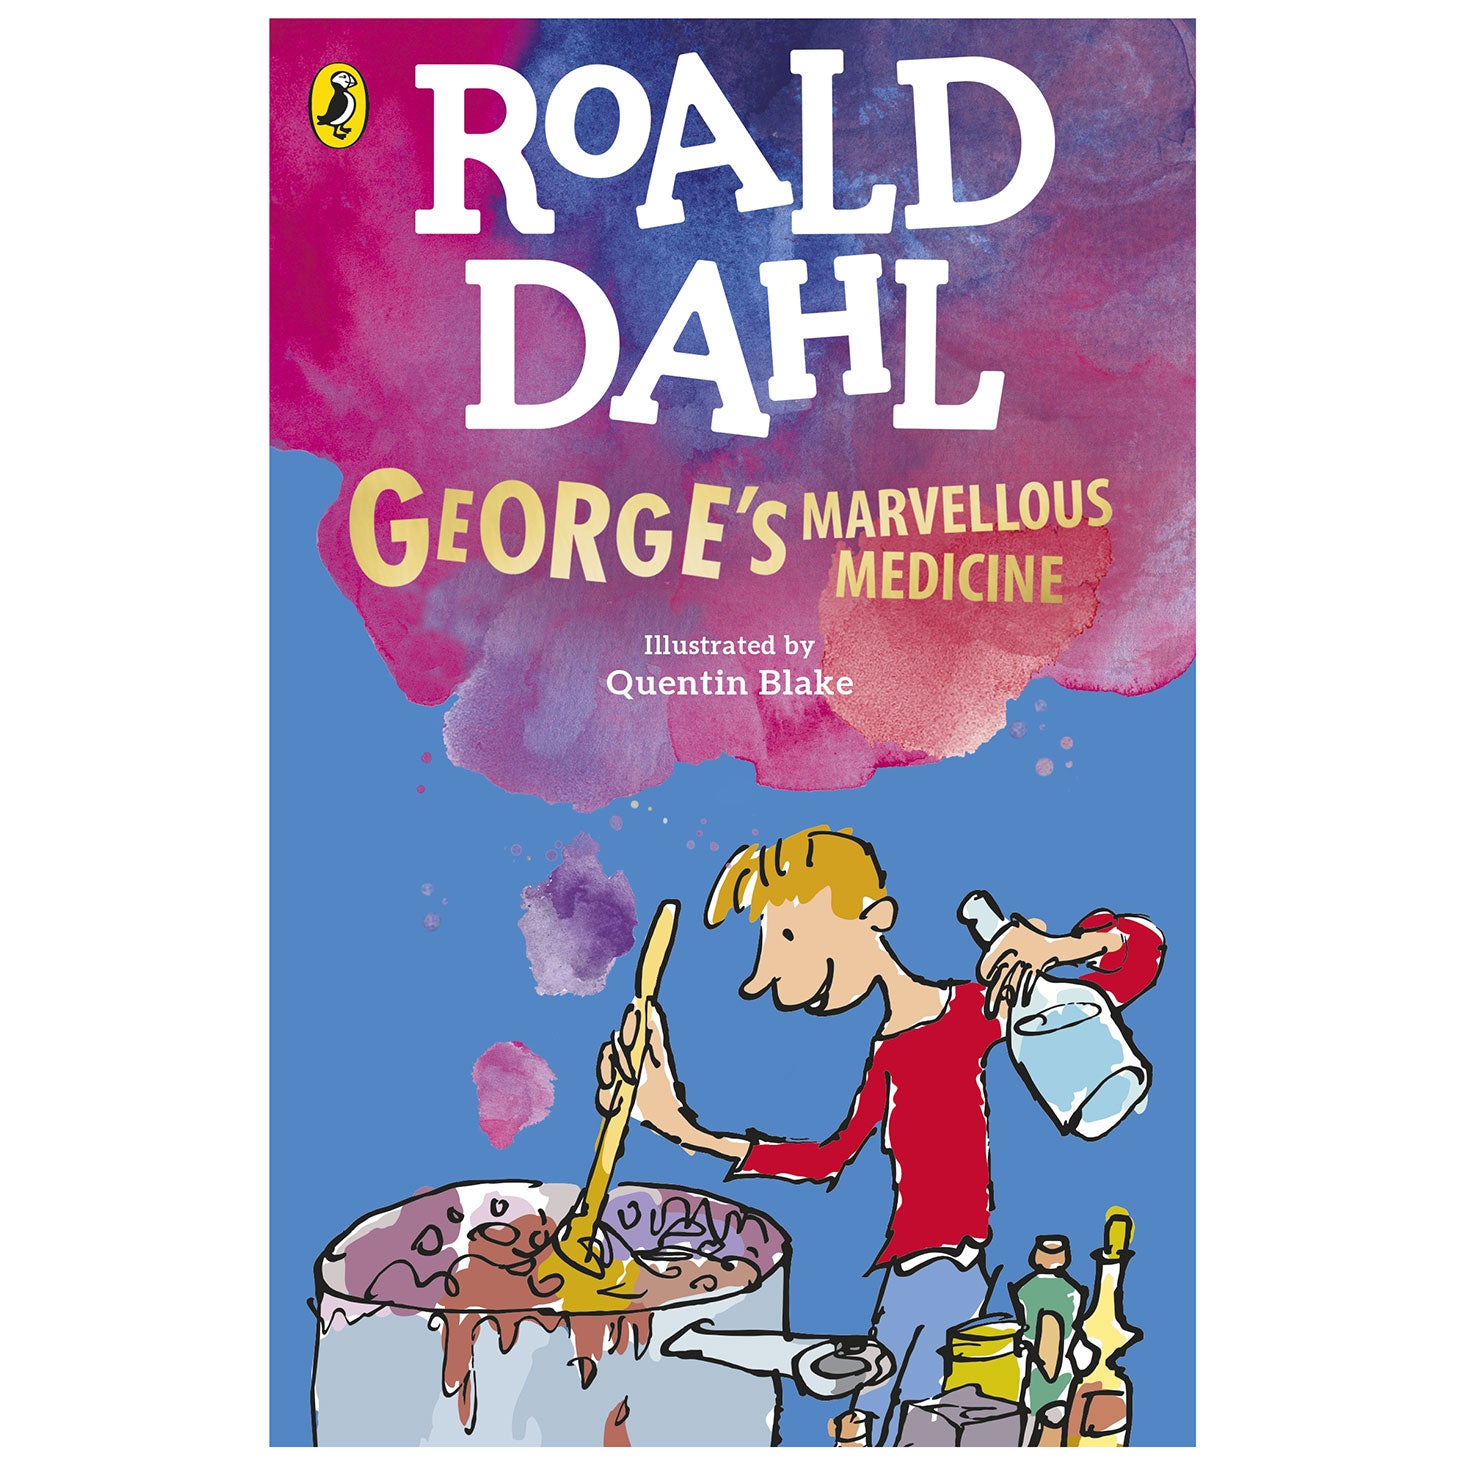 George's Marvellous Medicine by Roald Dahl with illustrations by Quentin Blake